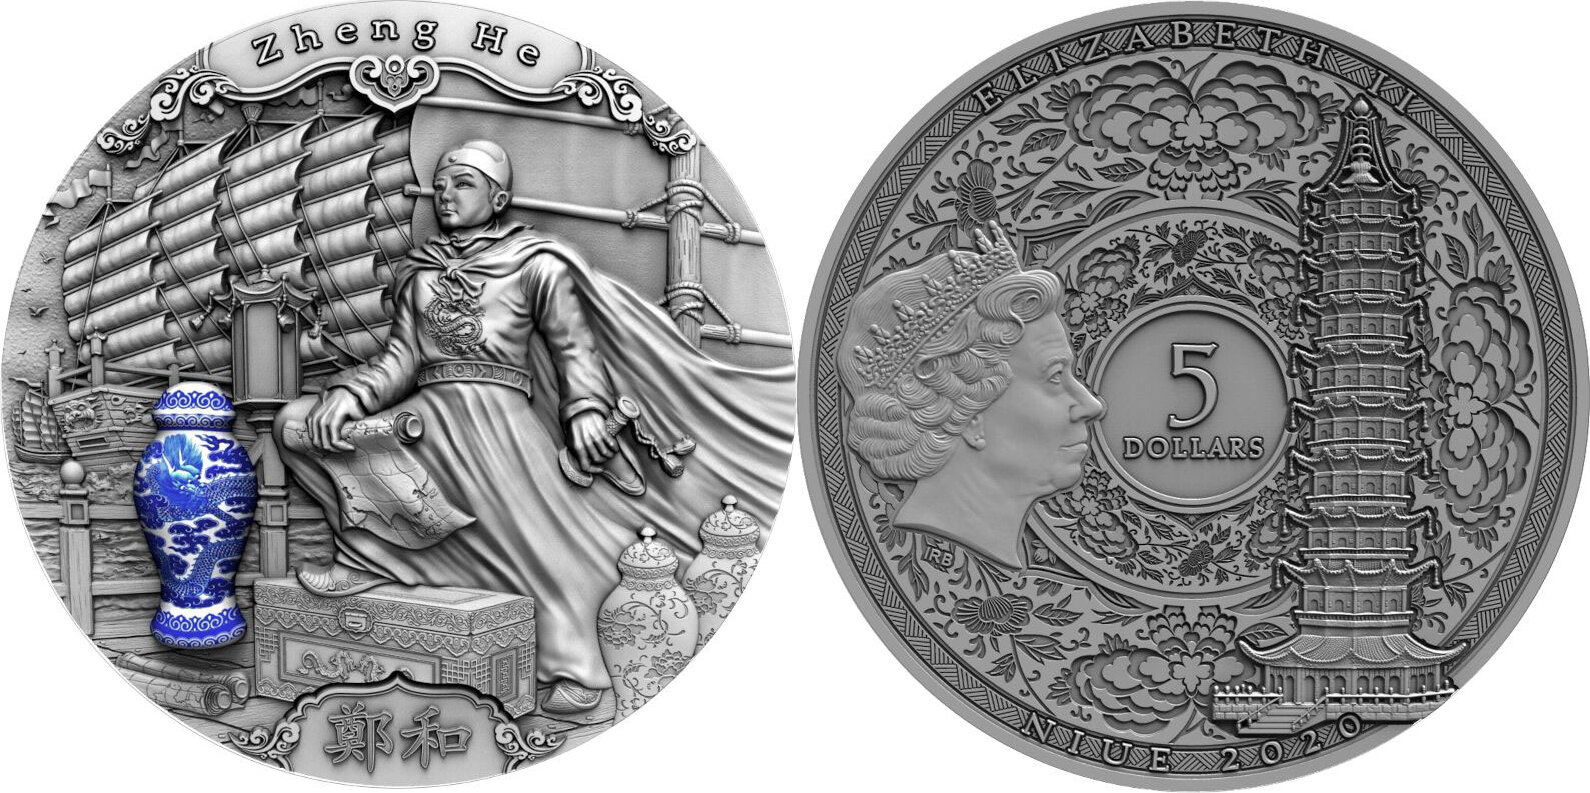 This stunning 2 Oz Silver coin is the first issue in the new “Famous Explor...